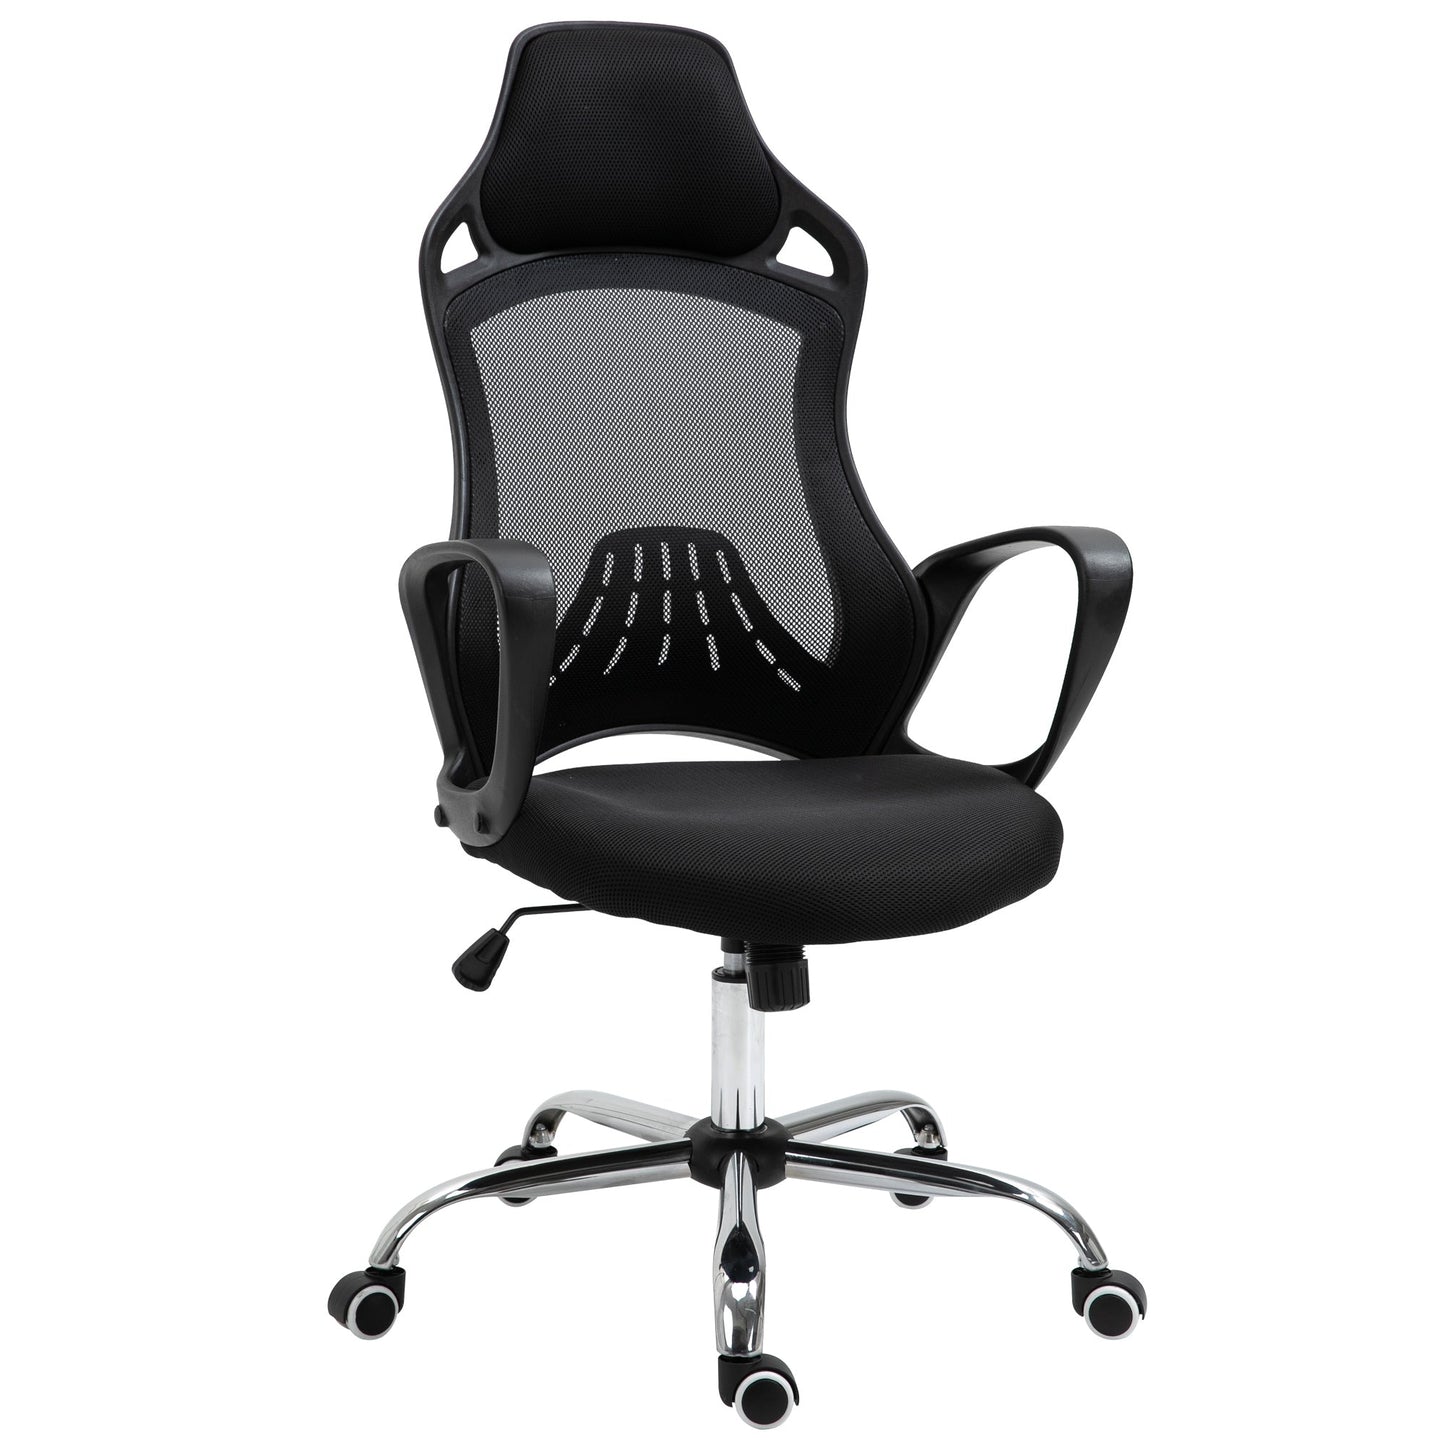 Ergonomic Office Chair Vesting Gaming Gaming chairs in breathable network fabric with large black armrests